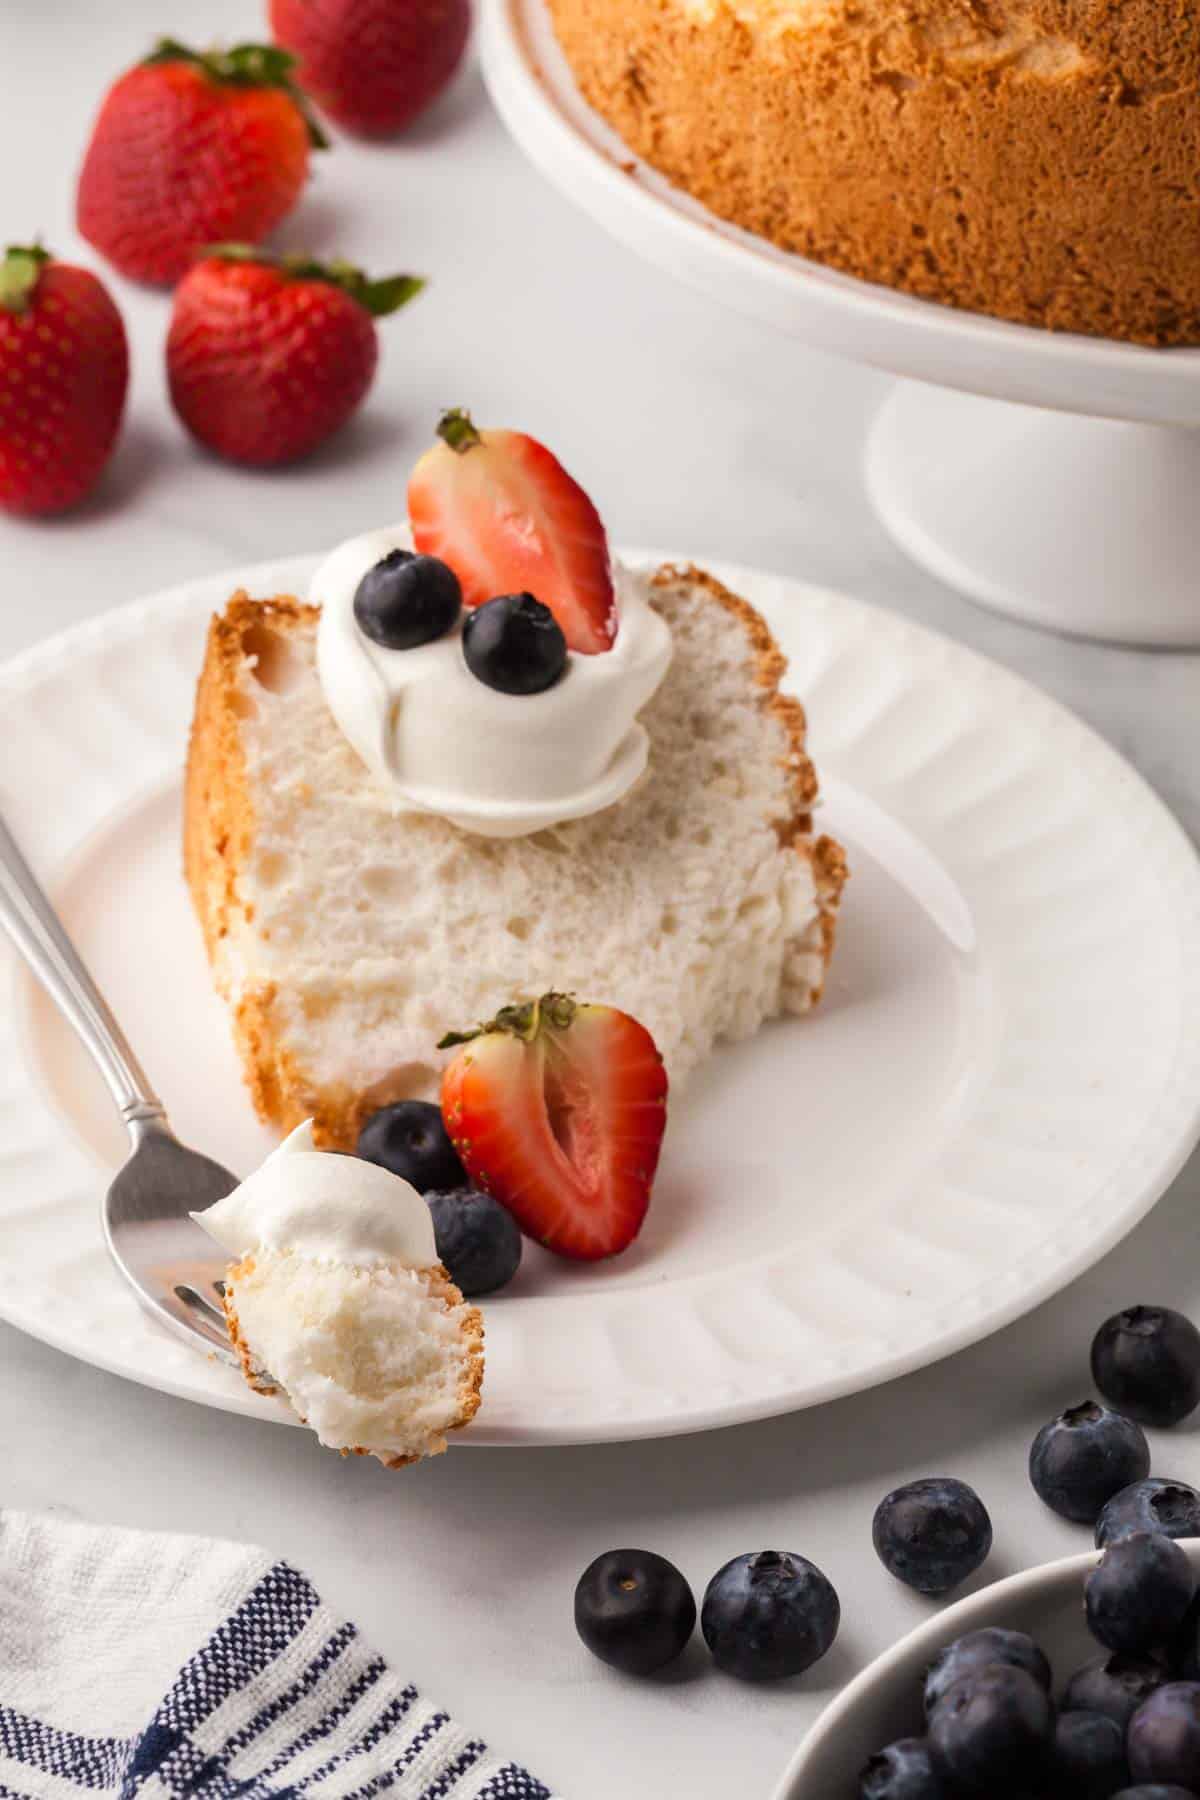 A slice of gluten-free angel food cake is shown on a white plate topped with whipped cream and berries, with a fork alongside.